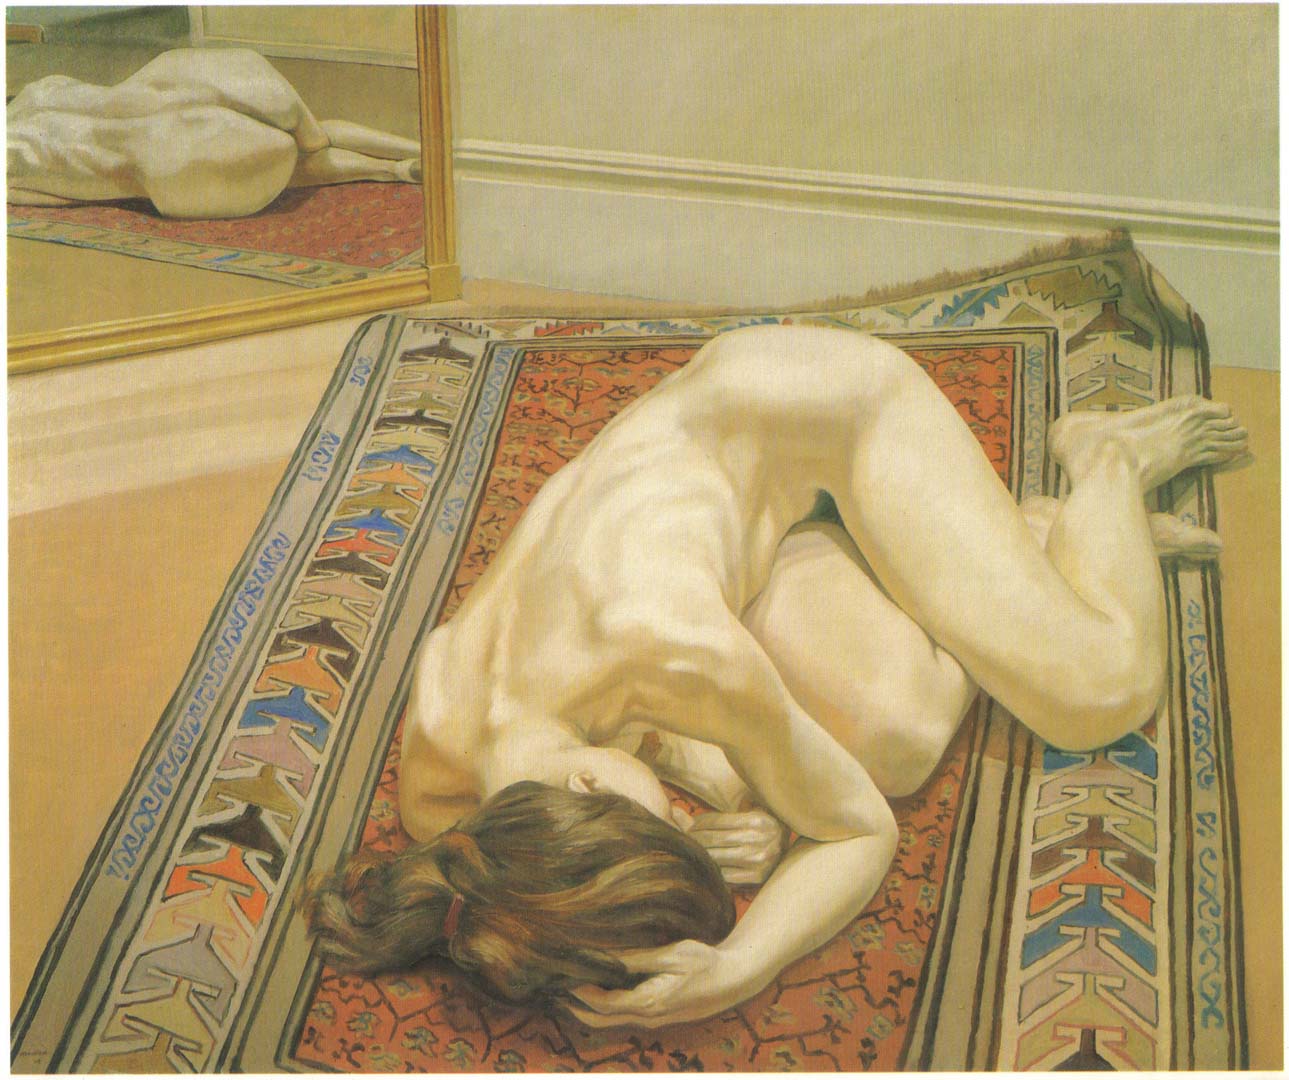 1968 Reclining Nude on Oriental Rug with Mirror Oil on Canvas 60 x 72